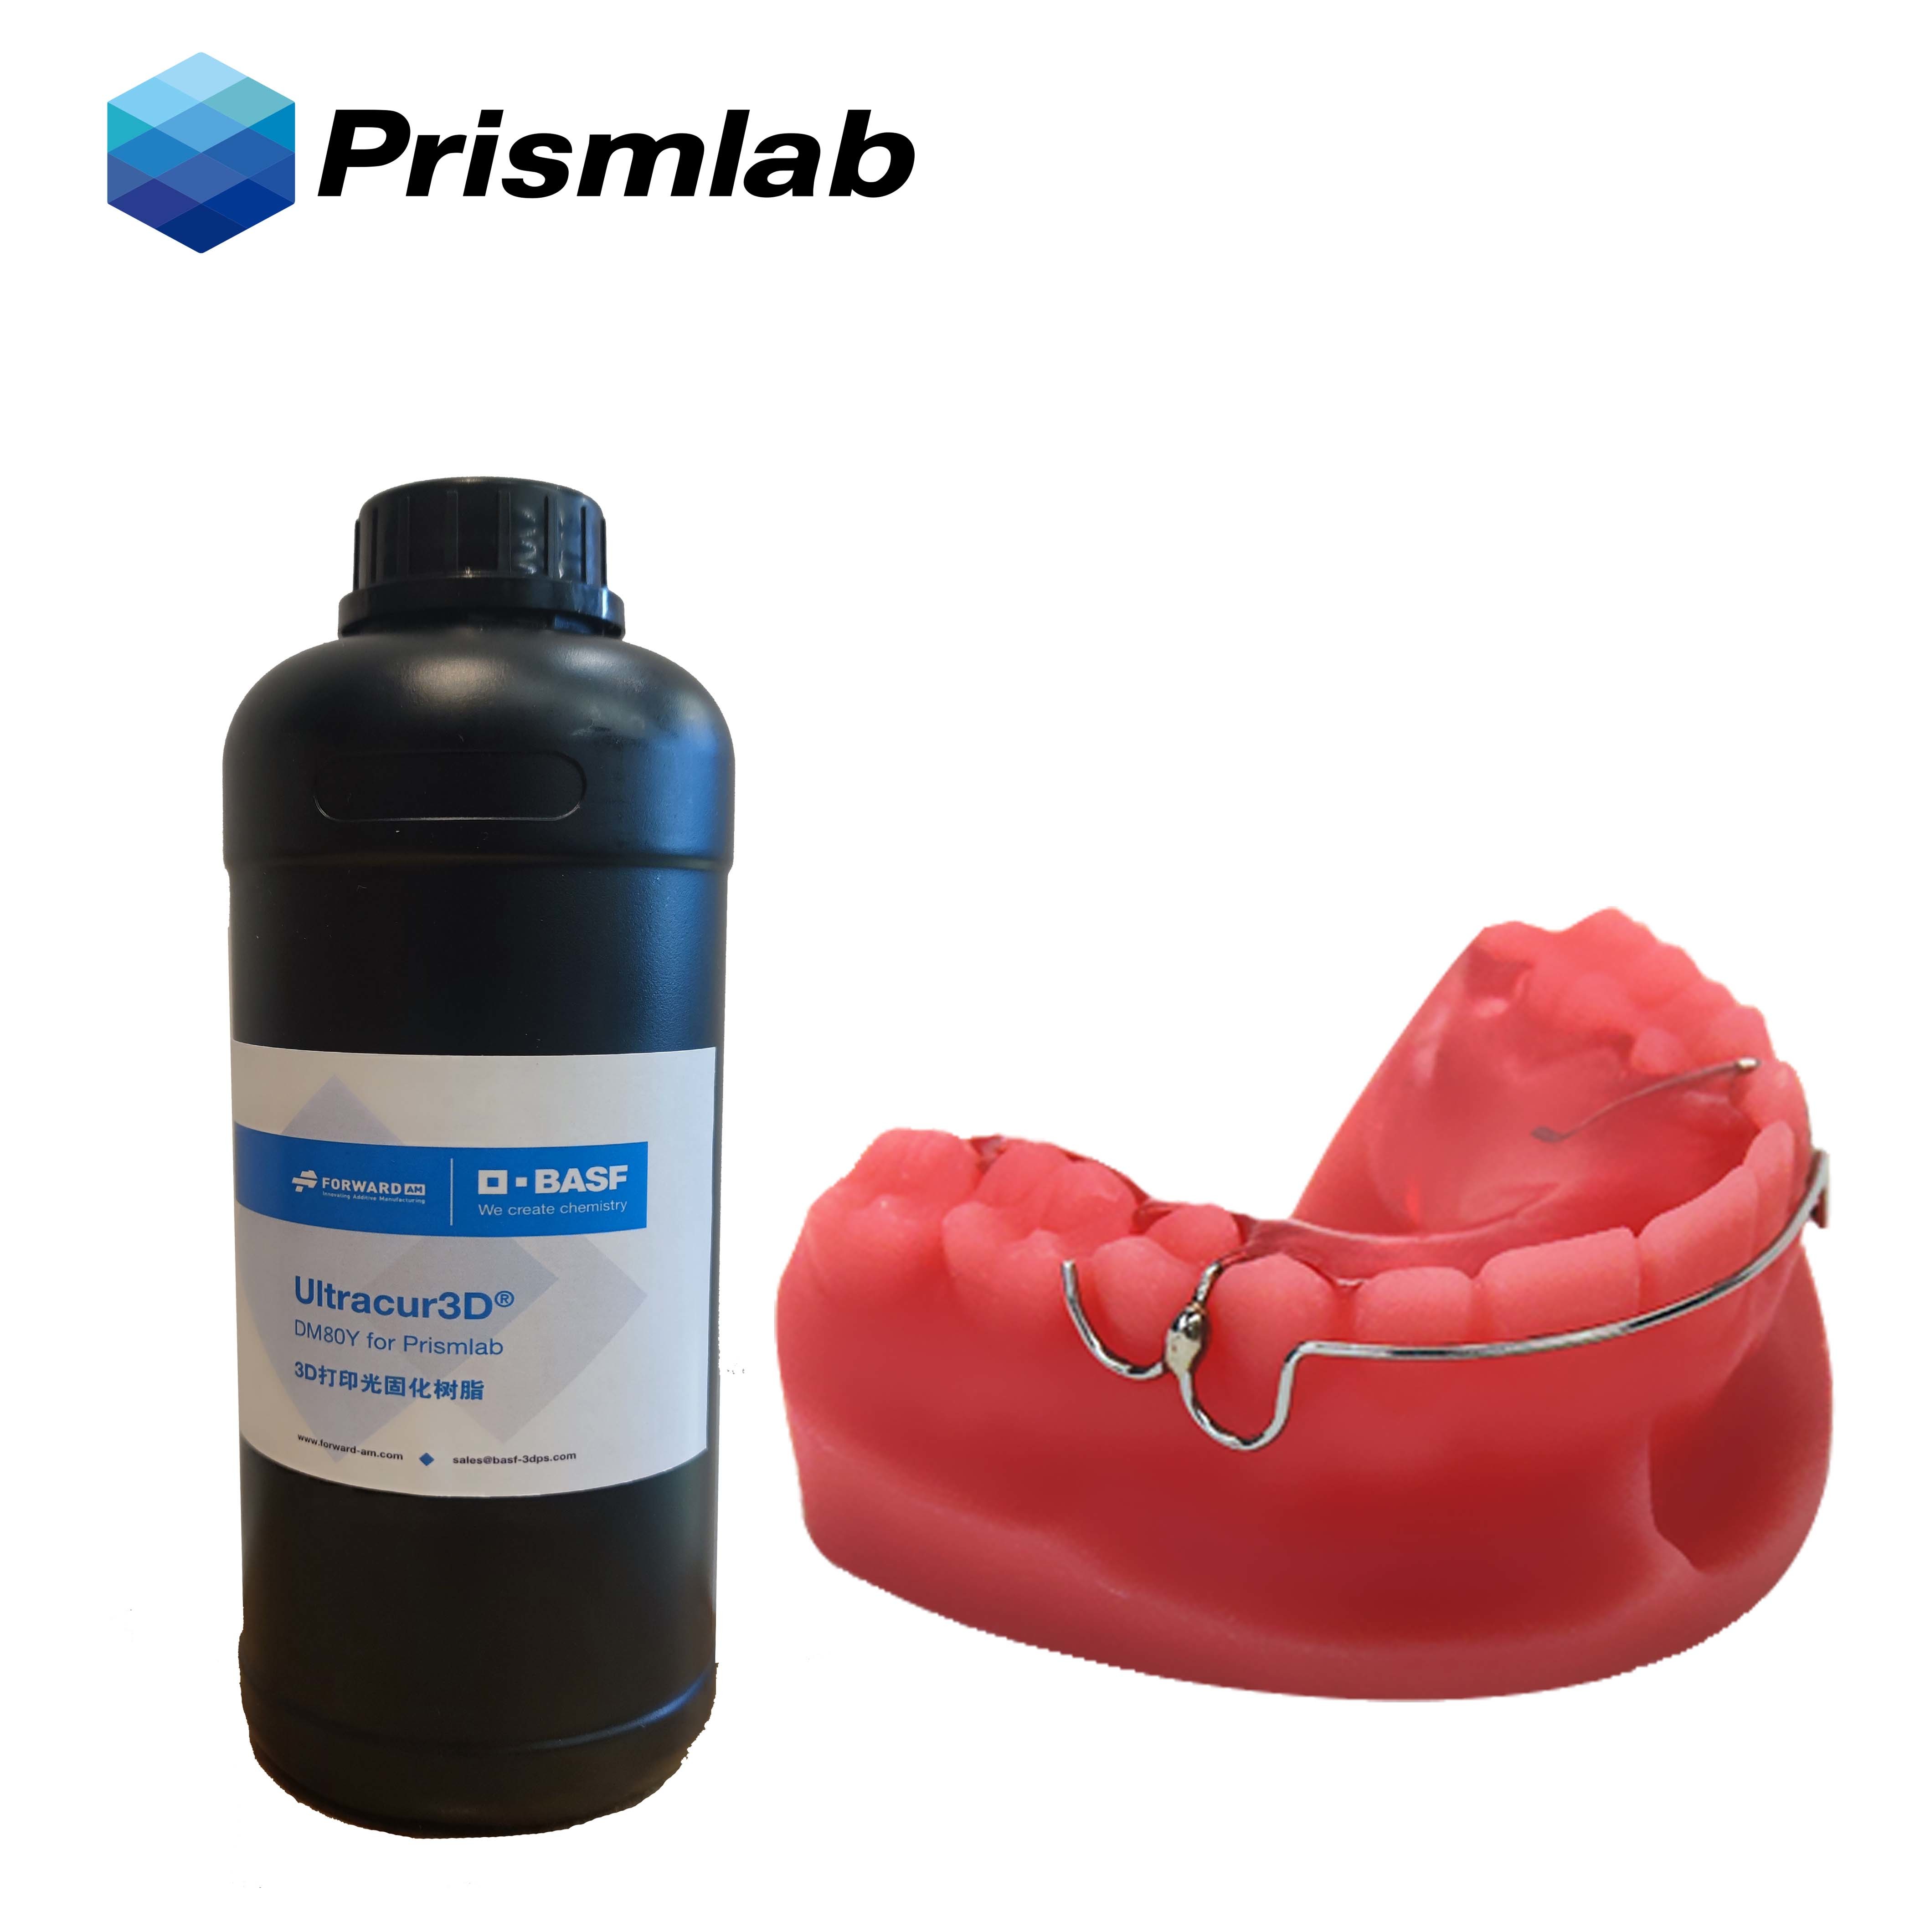  Wholesale Odorless Biocompatible 500ml Liquid Medical Class High Performance Dental Photopolymer Resin for 3D Printing Manufactures